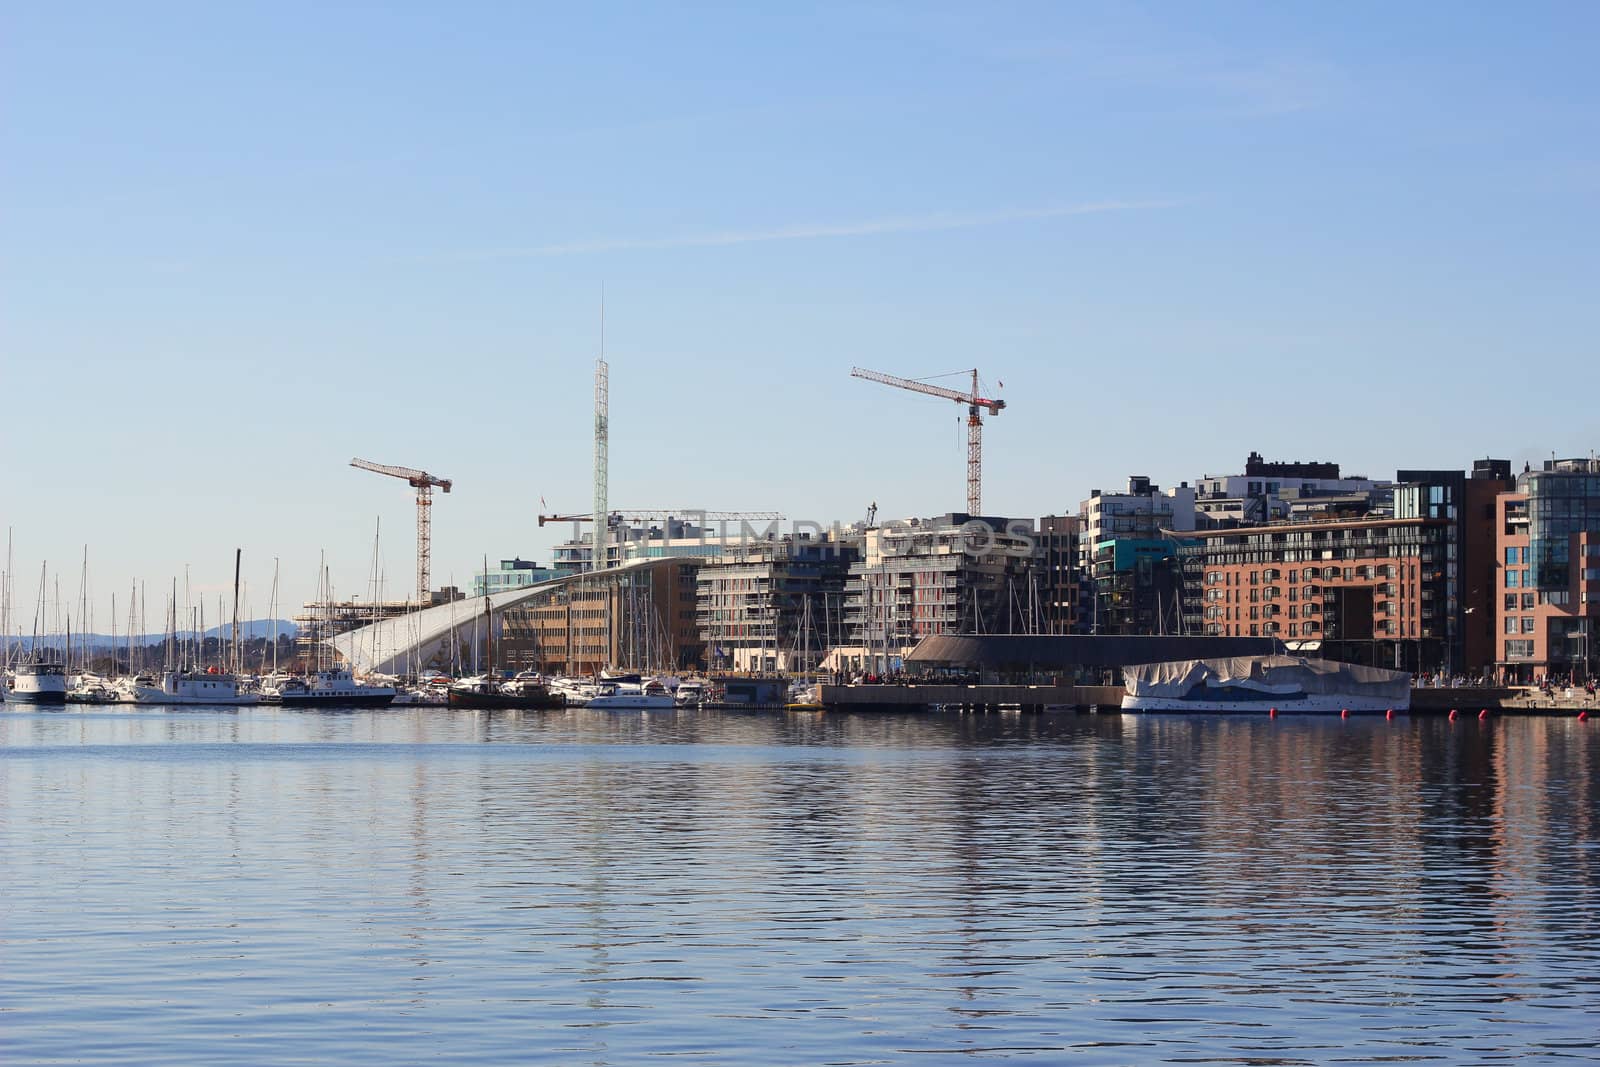 Aker Brygge is an area in Oslo, Norway. It is a popular meeting place for shopping, dining, and entertainment. As many as 12 million visitors a year make Aker Brygge Norway's biggest destination.